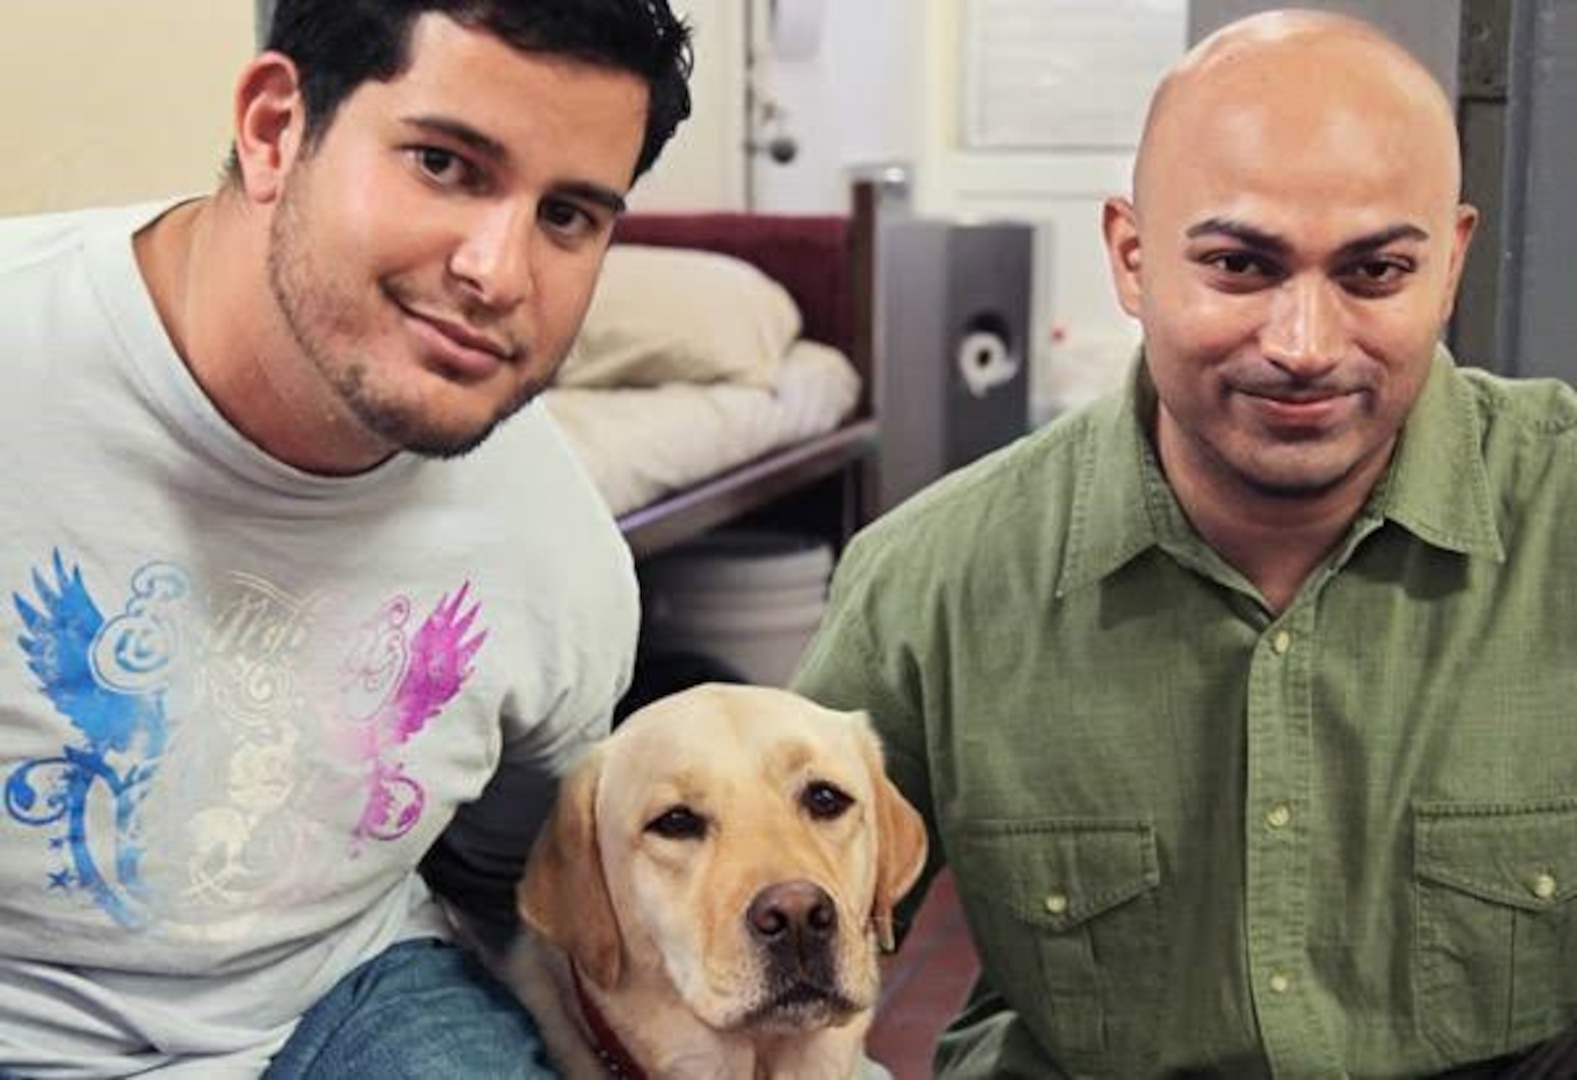 William Pagan, a Defense Logistics Agency forward logistics specialist, left, poses beside his former service dog, a yellow lab named Oprah, and her trainer Vijay Ramroop.